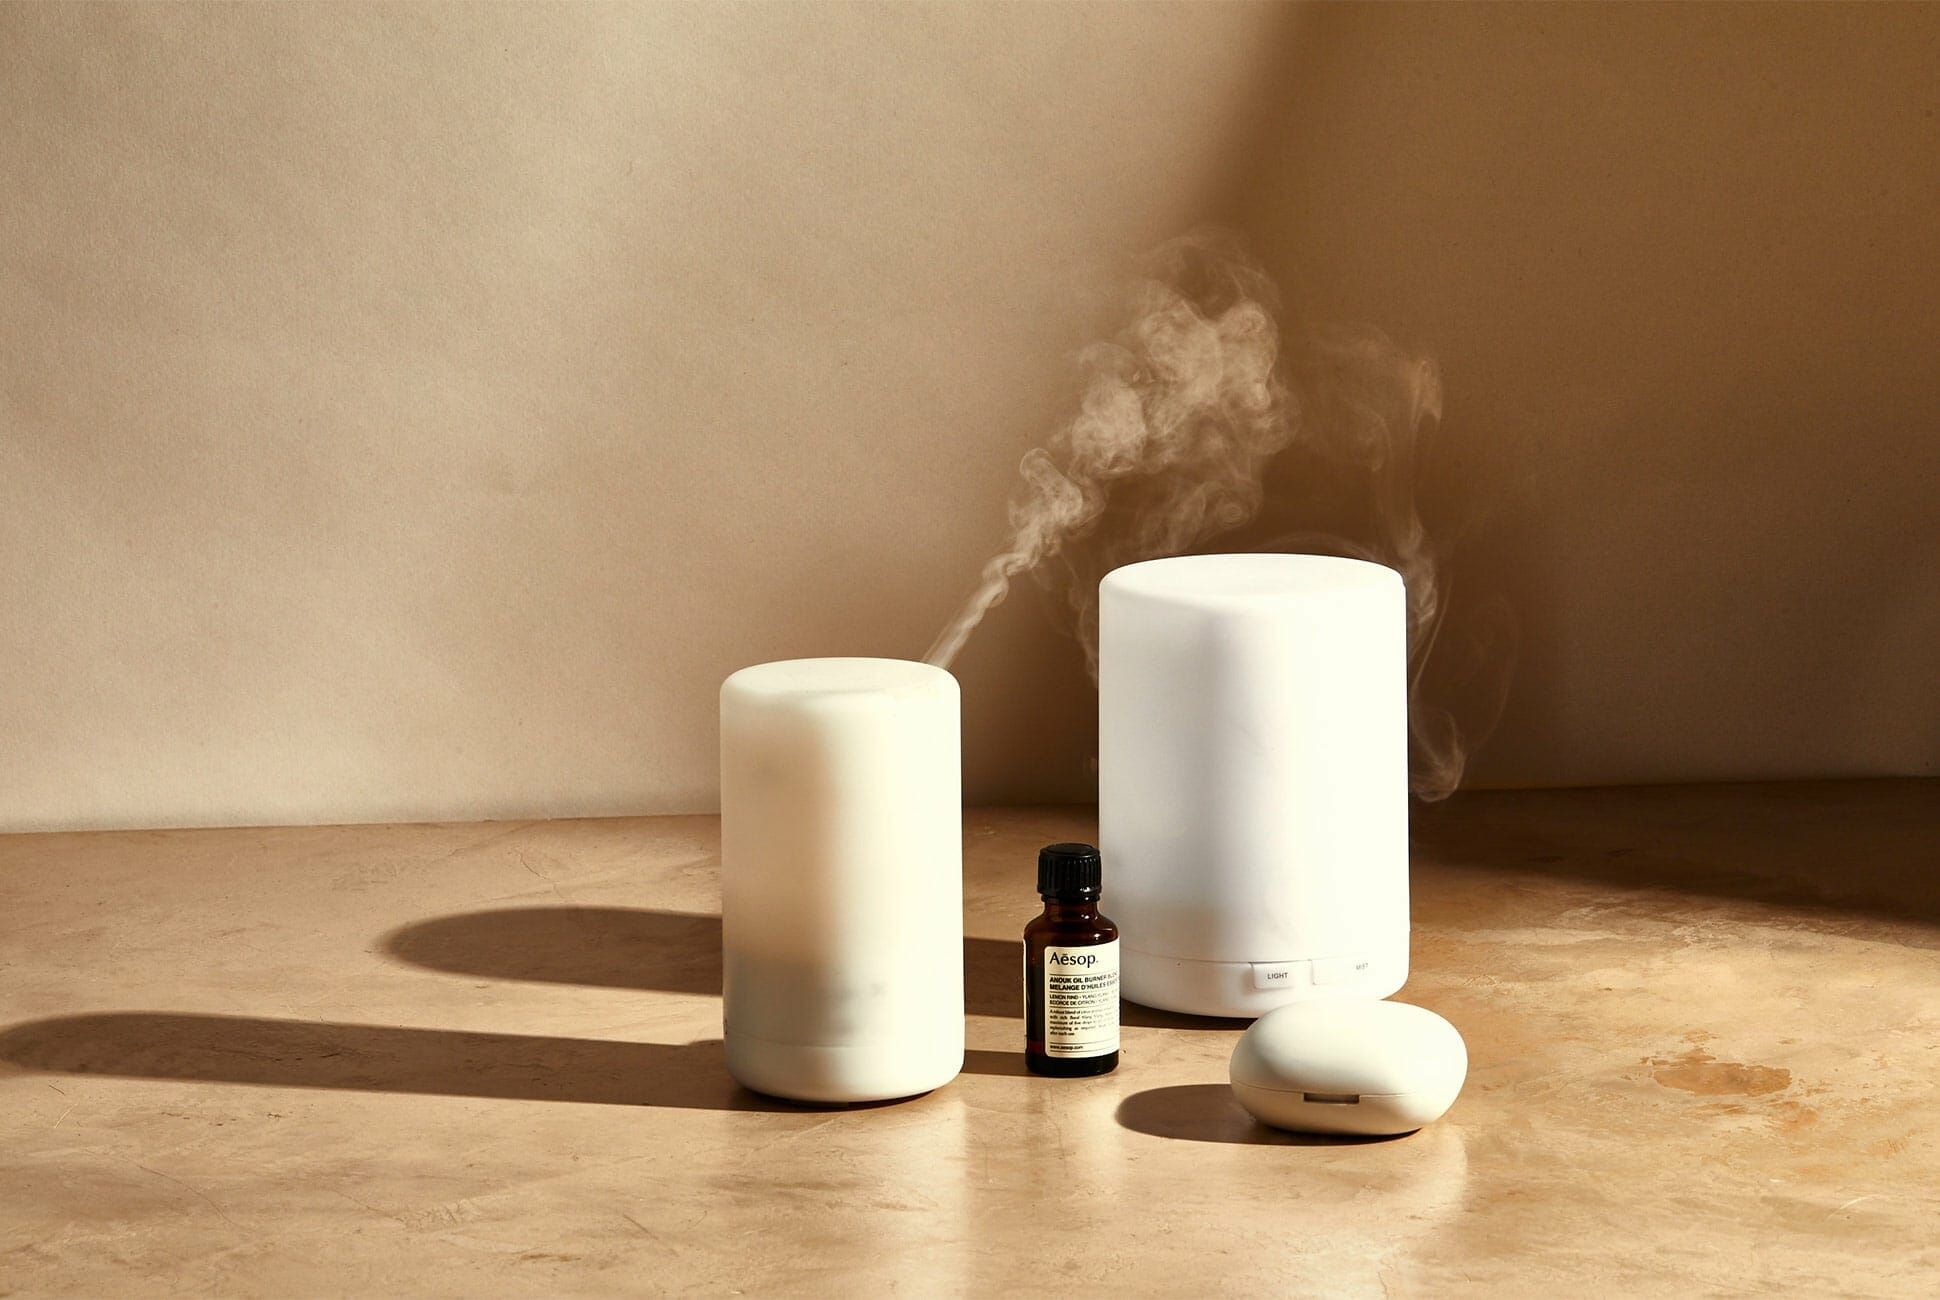 12 Best Essential Oil Diffusers: large rooms, portable and more